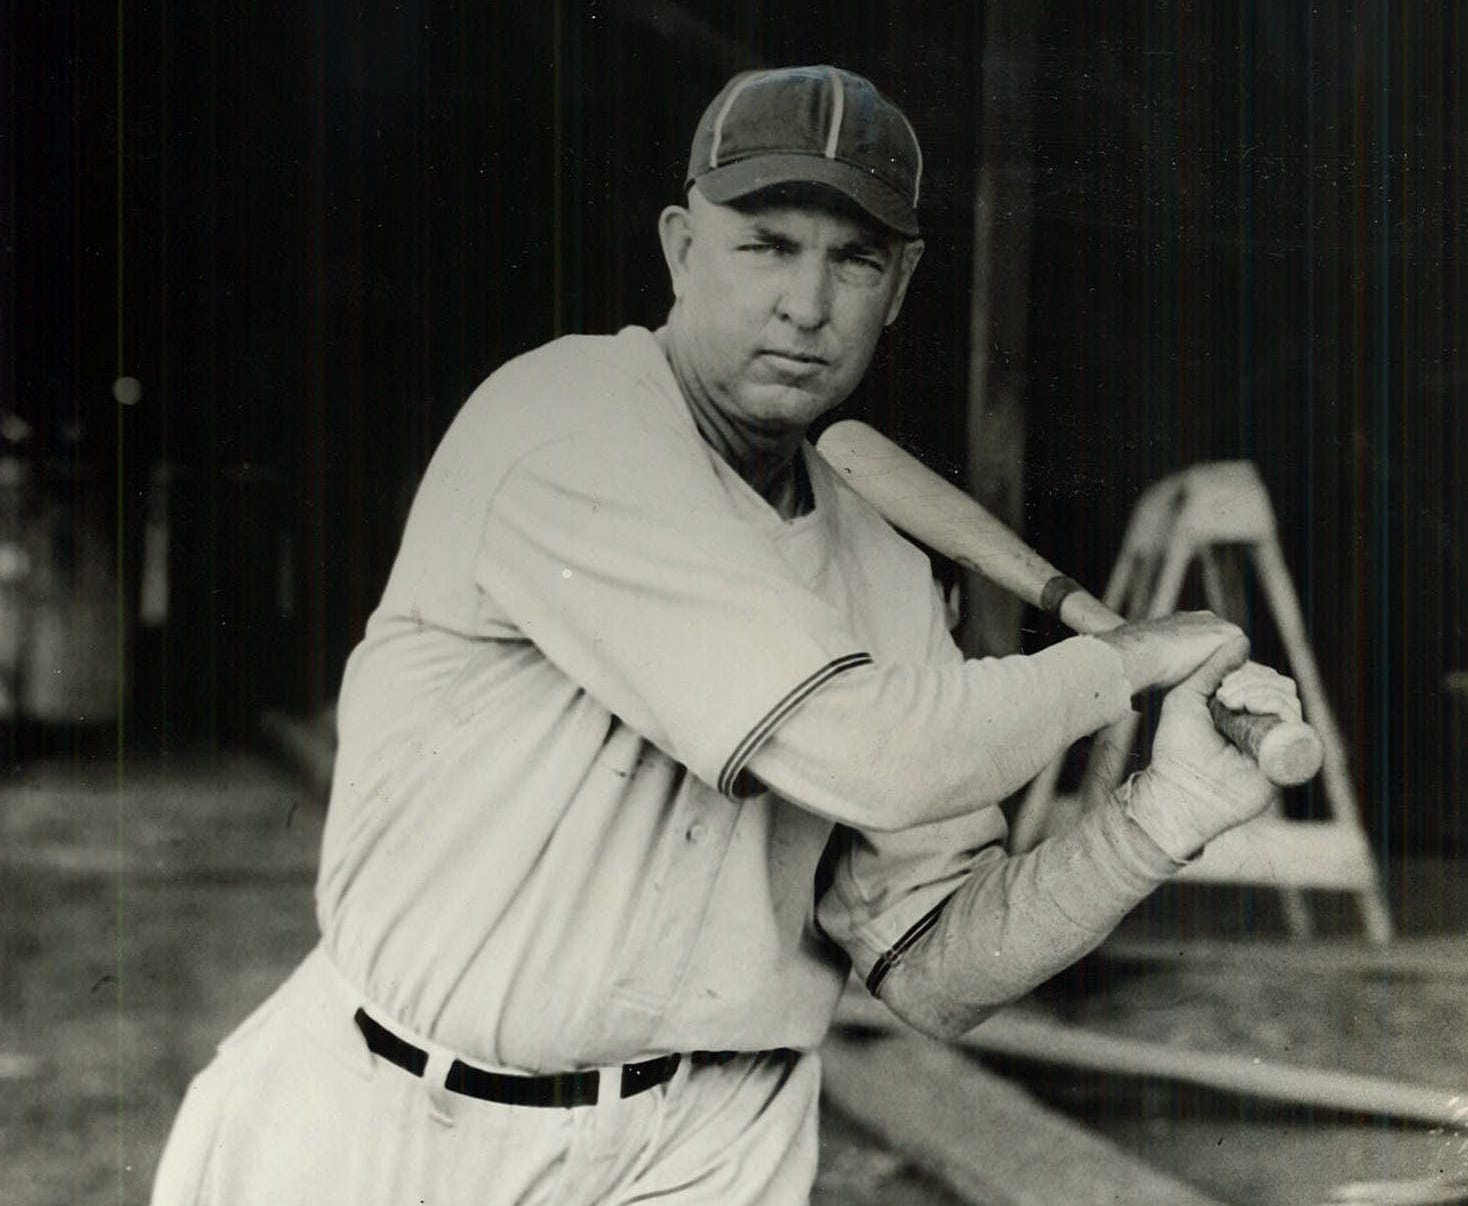 Published in the Register April 10, 1941..... Hank Severeid was a catcher
Full Name: Henry Levai Severeid
Bats: Right Throws: Right
Height: 6'0"
Weight: 175 lbs.
Born: Jun 01, 1891 in Story City, IA
Major League Debut: May 15, 1911
Died: Dec 17, 1968 in San Antonio, TX